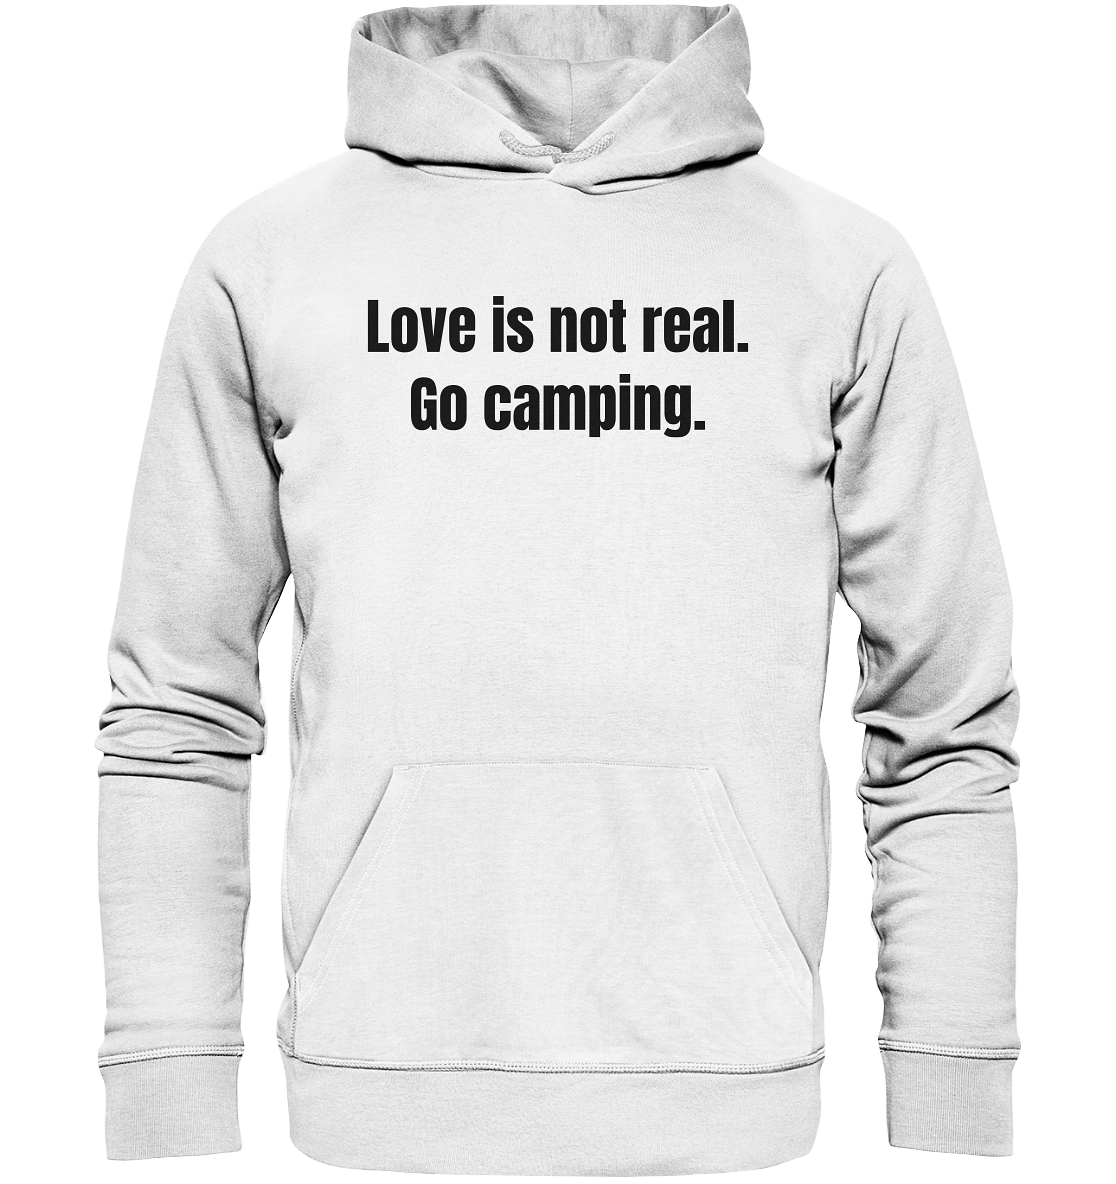 Love is not real. Go camping. - Organic Basic Hoodie